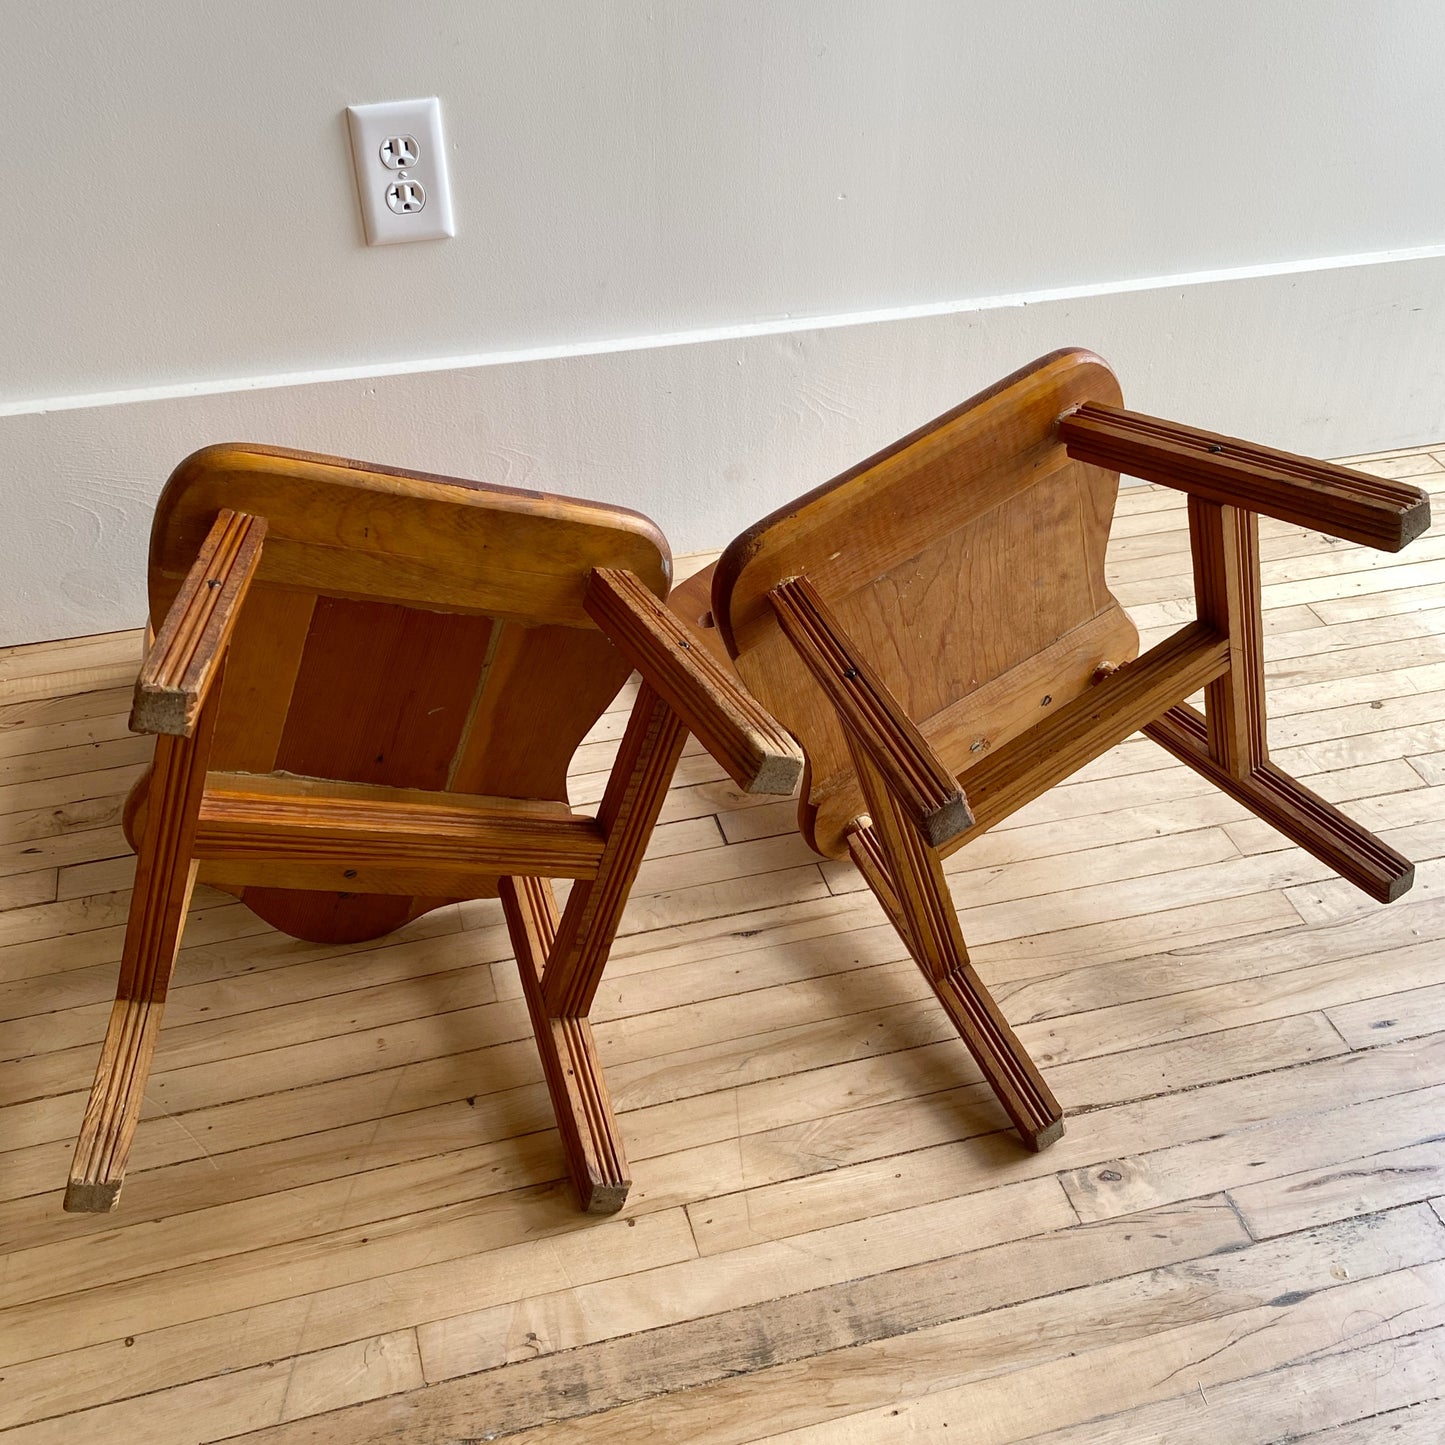 Pair of Vintage Handcrafted Children’s Chairs